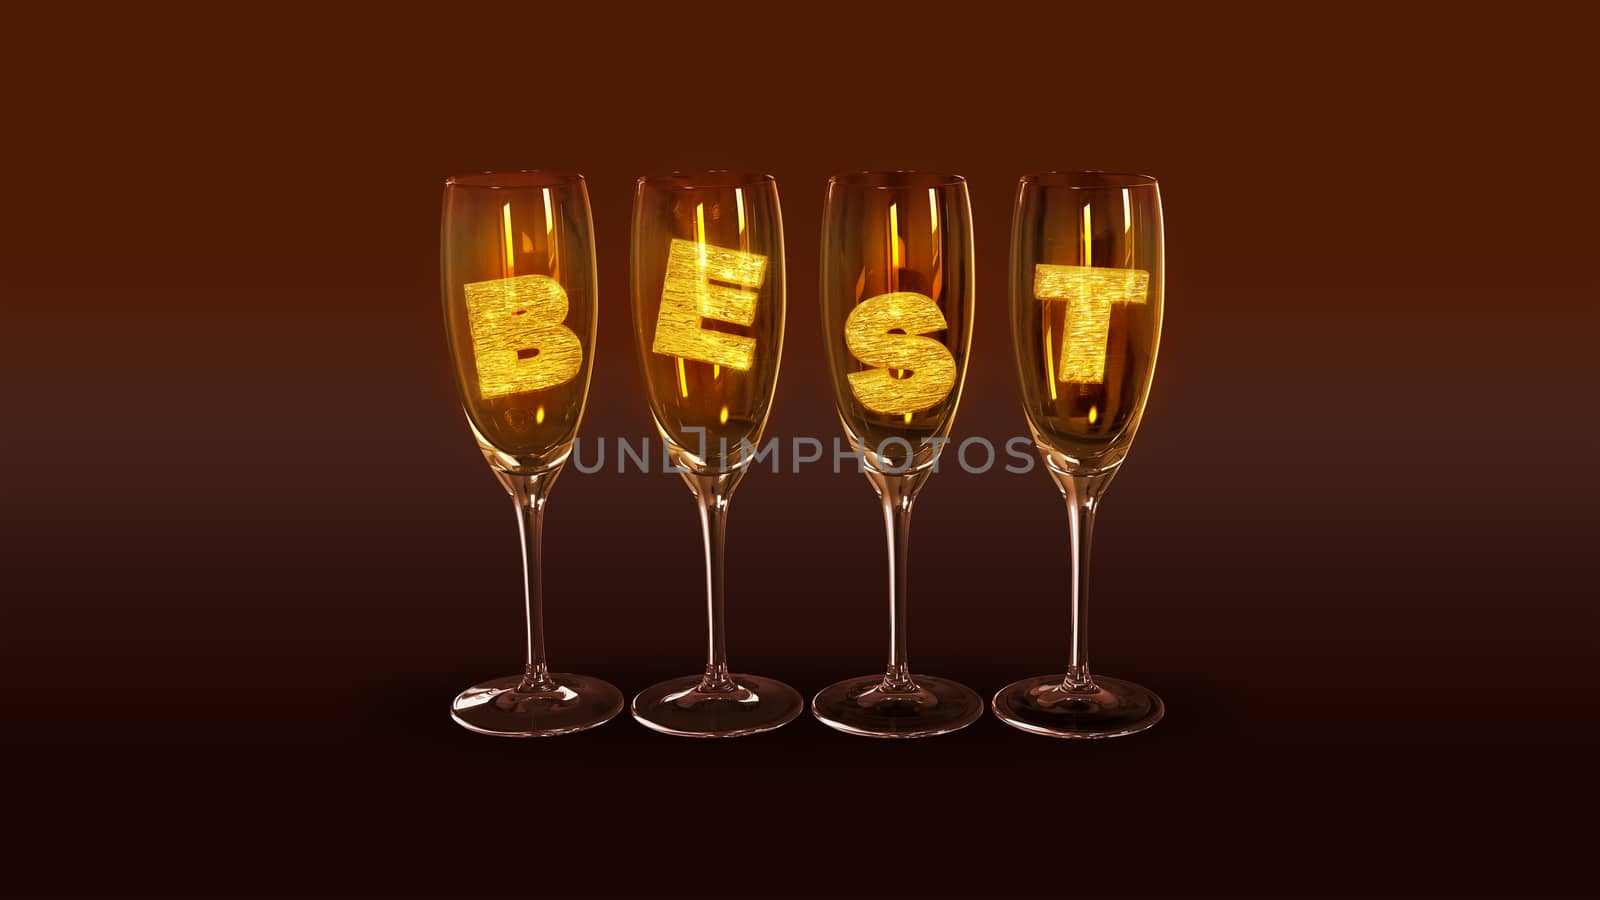 A few glasses with the text "best" on a brown background as a symbol of the best parties